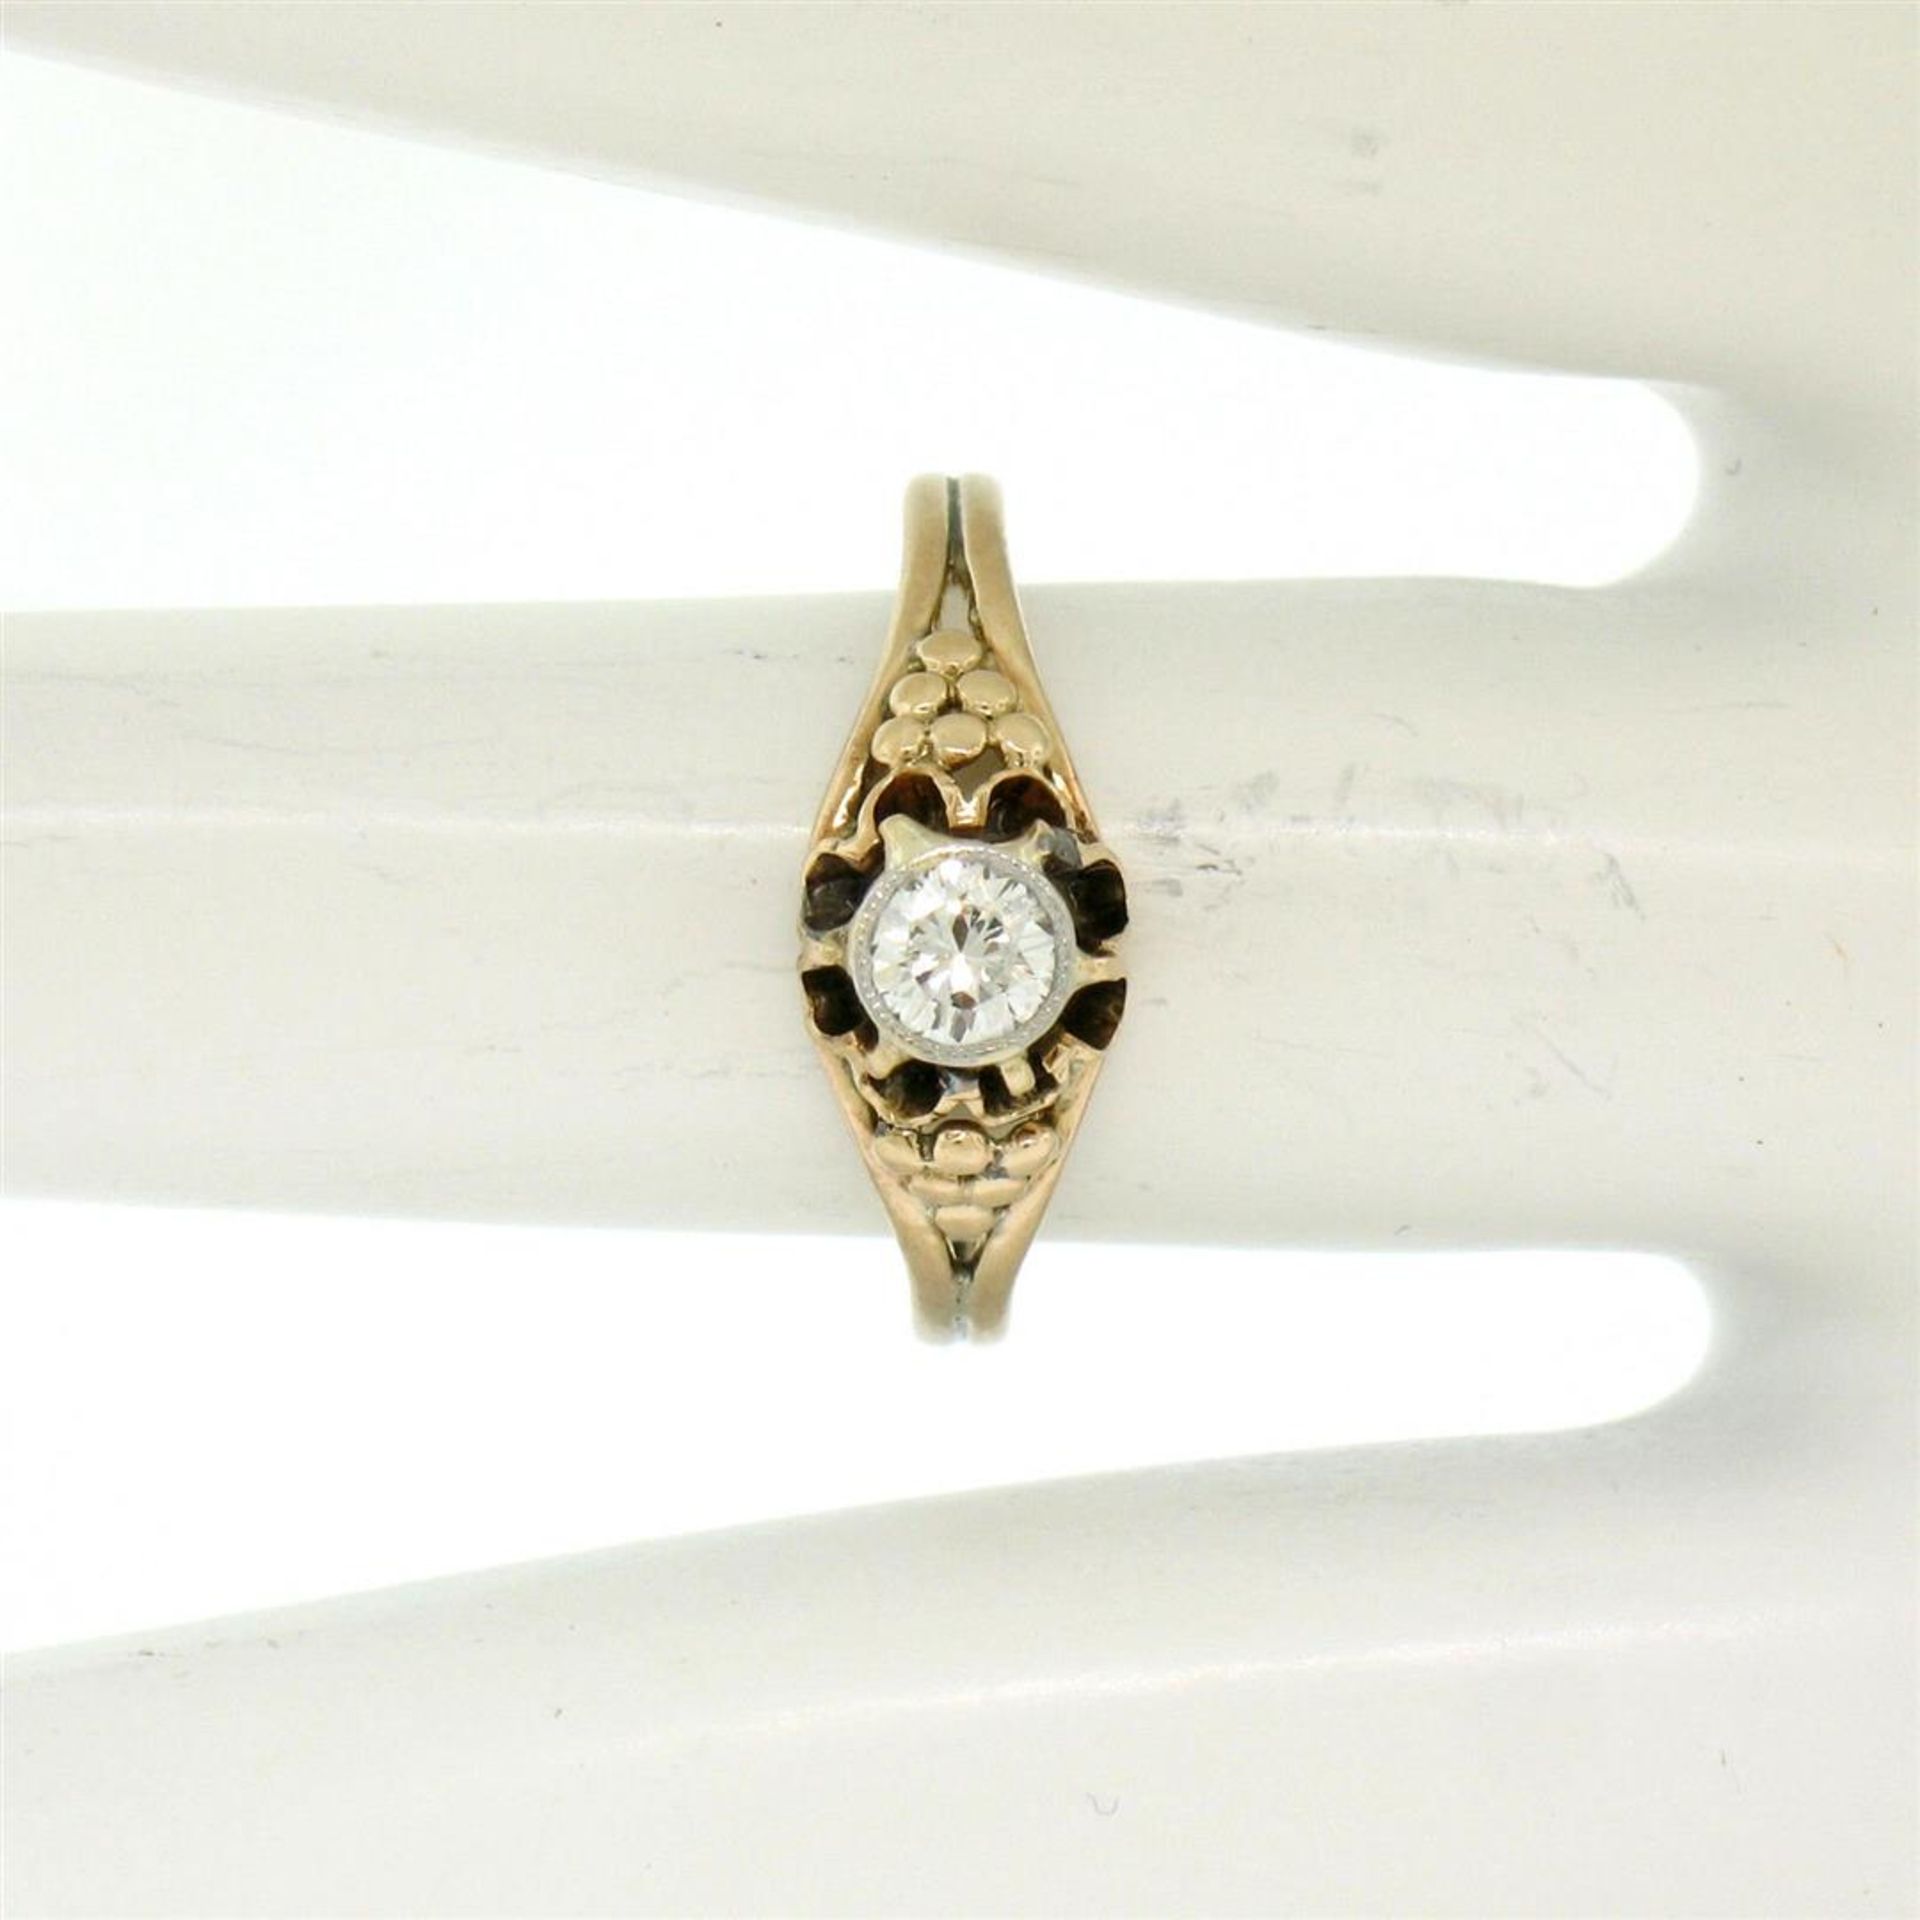 Antique 14kt Yellow and White Gold 0.30 ct Diamond Solitaire Ring - Image 8 of 8